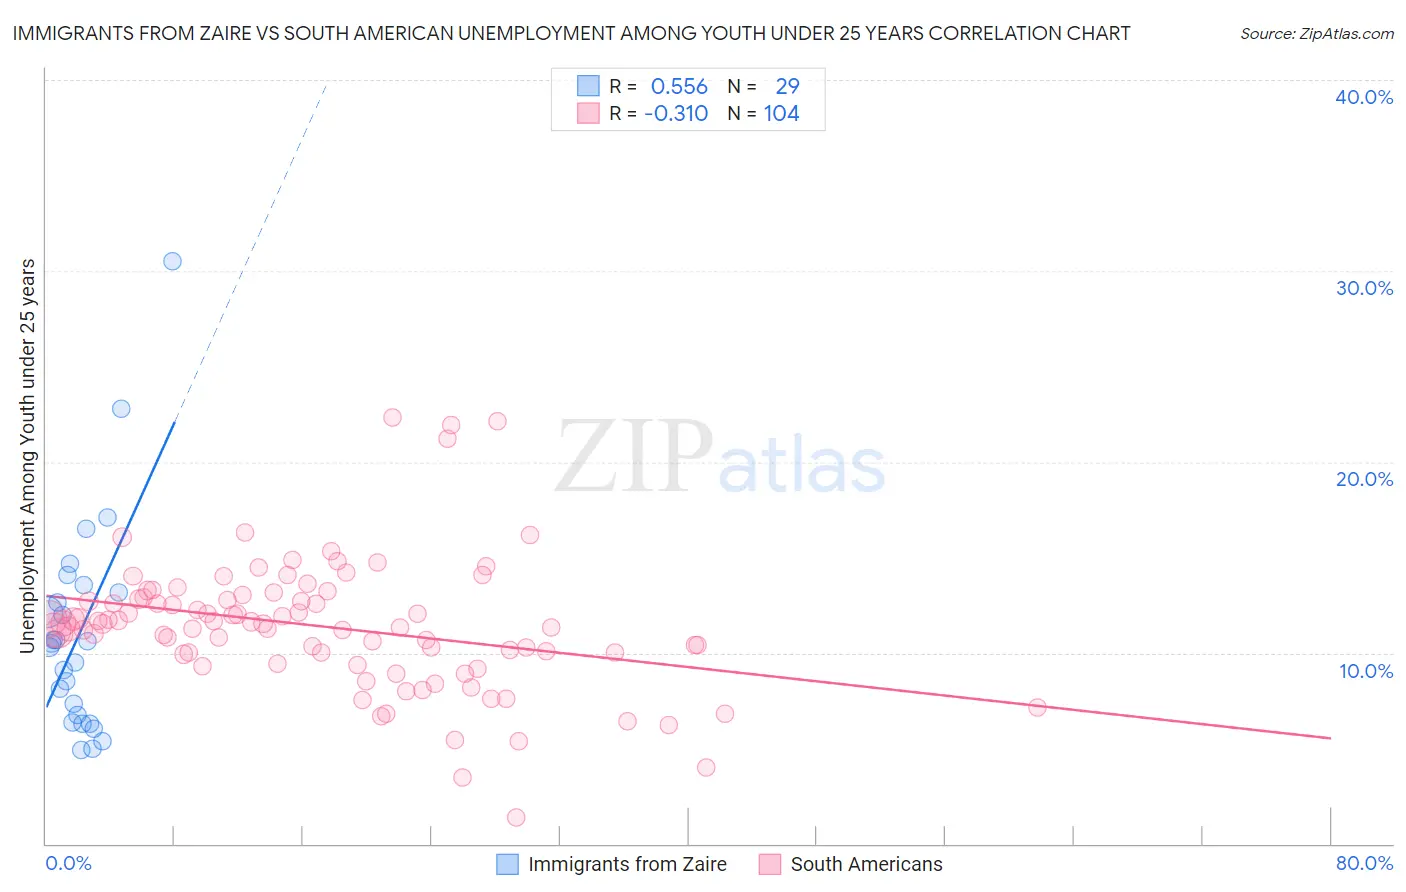 Immigrants from Zaire vs South American Unemployment Among Youth under 25 years